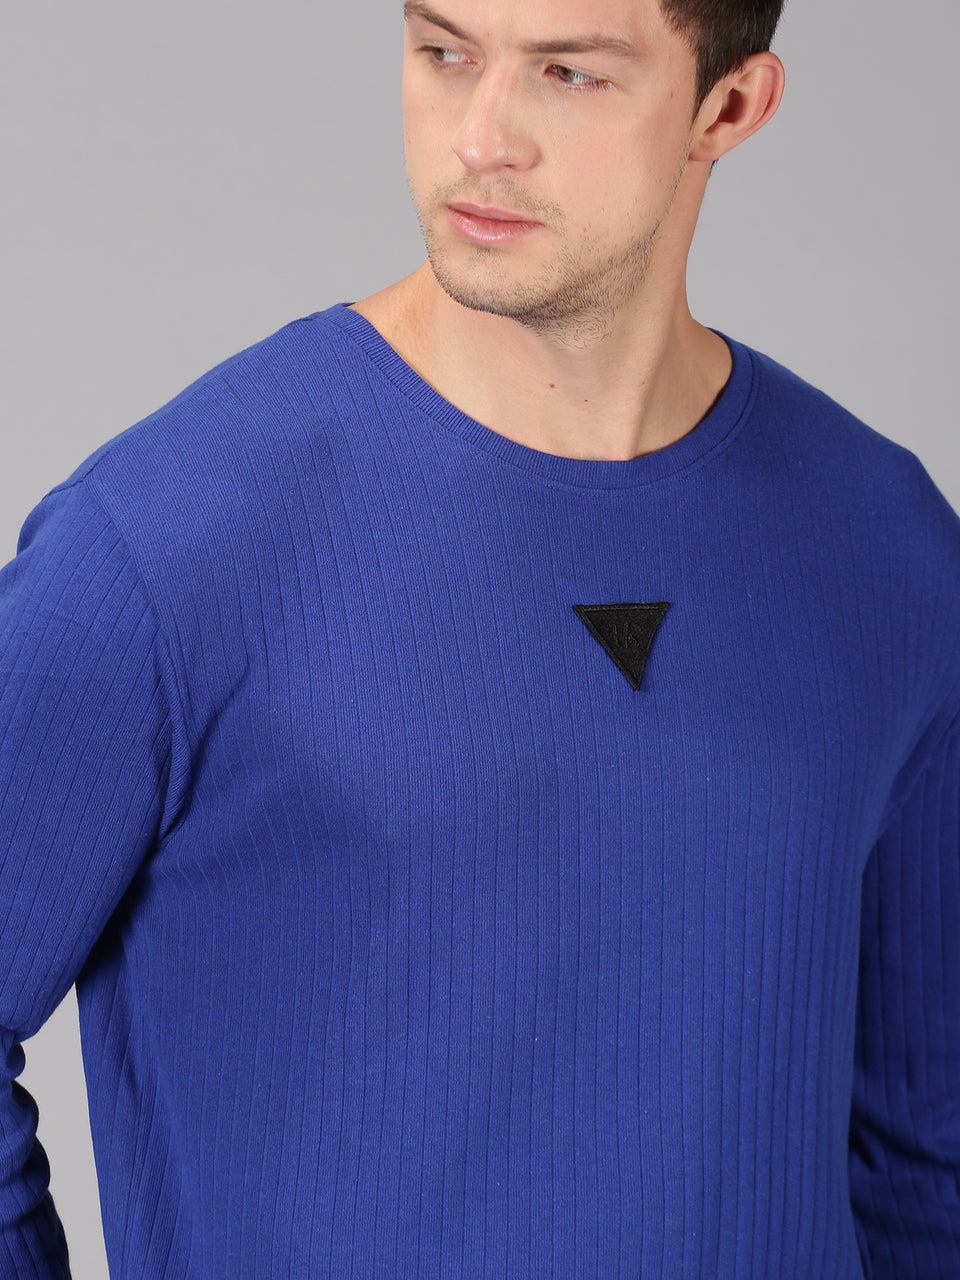 Men Blue Plain Solid Self Design Round Neck Recycled Cotton Full Sleeve Regular Fit Casual T-Shirt